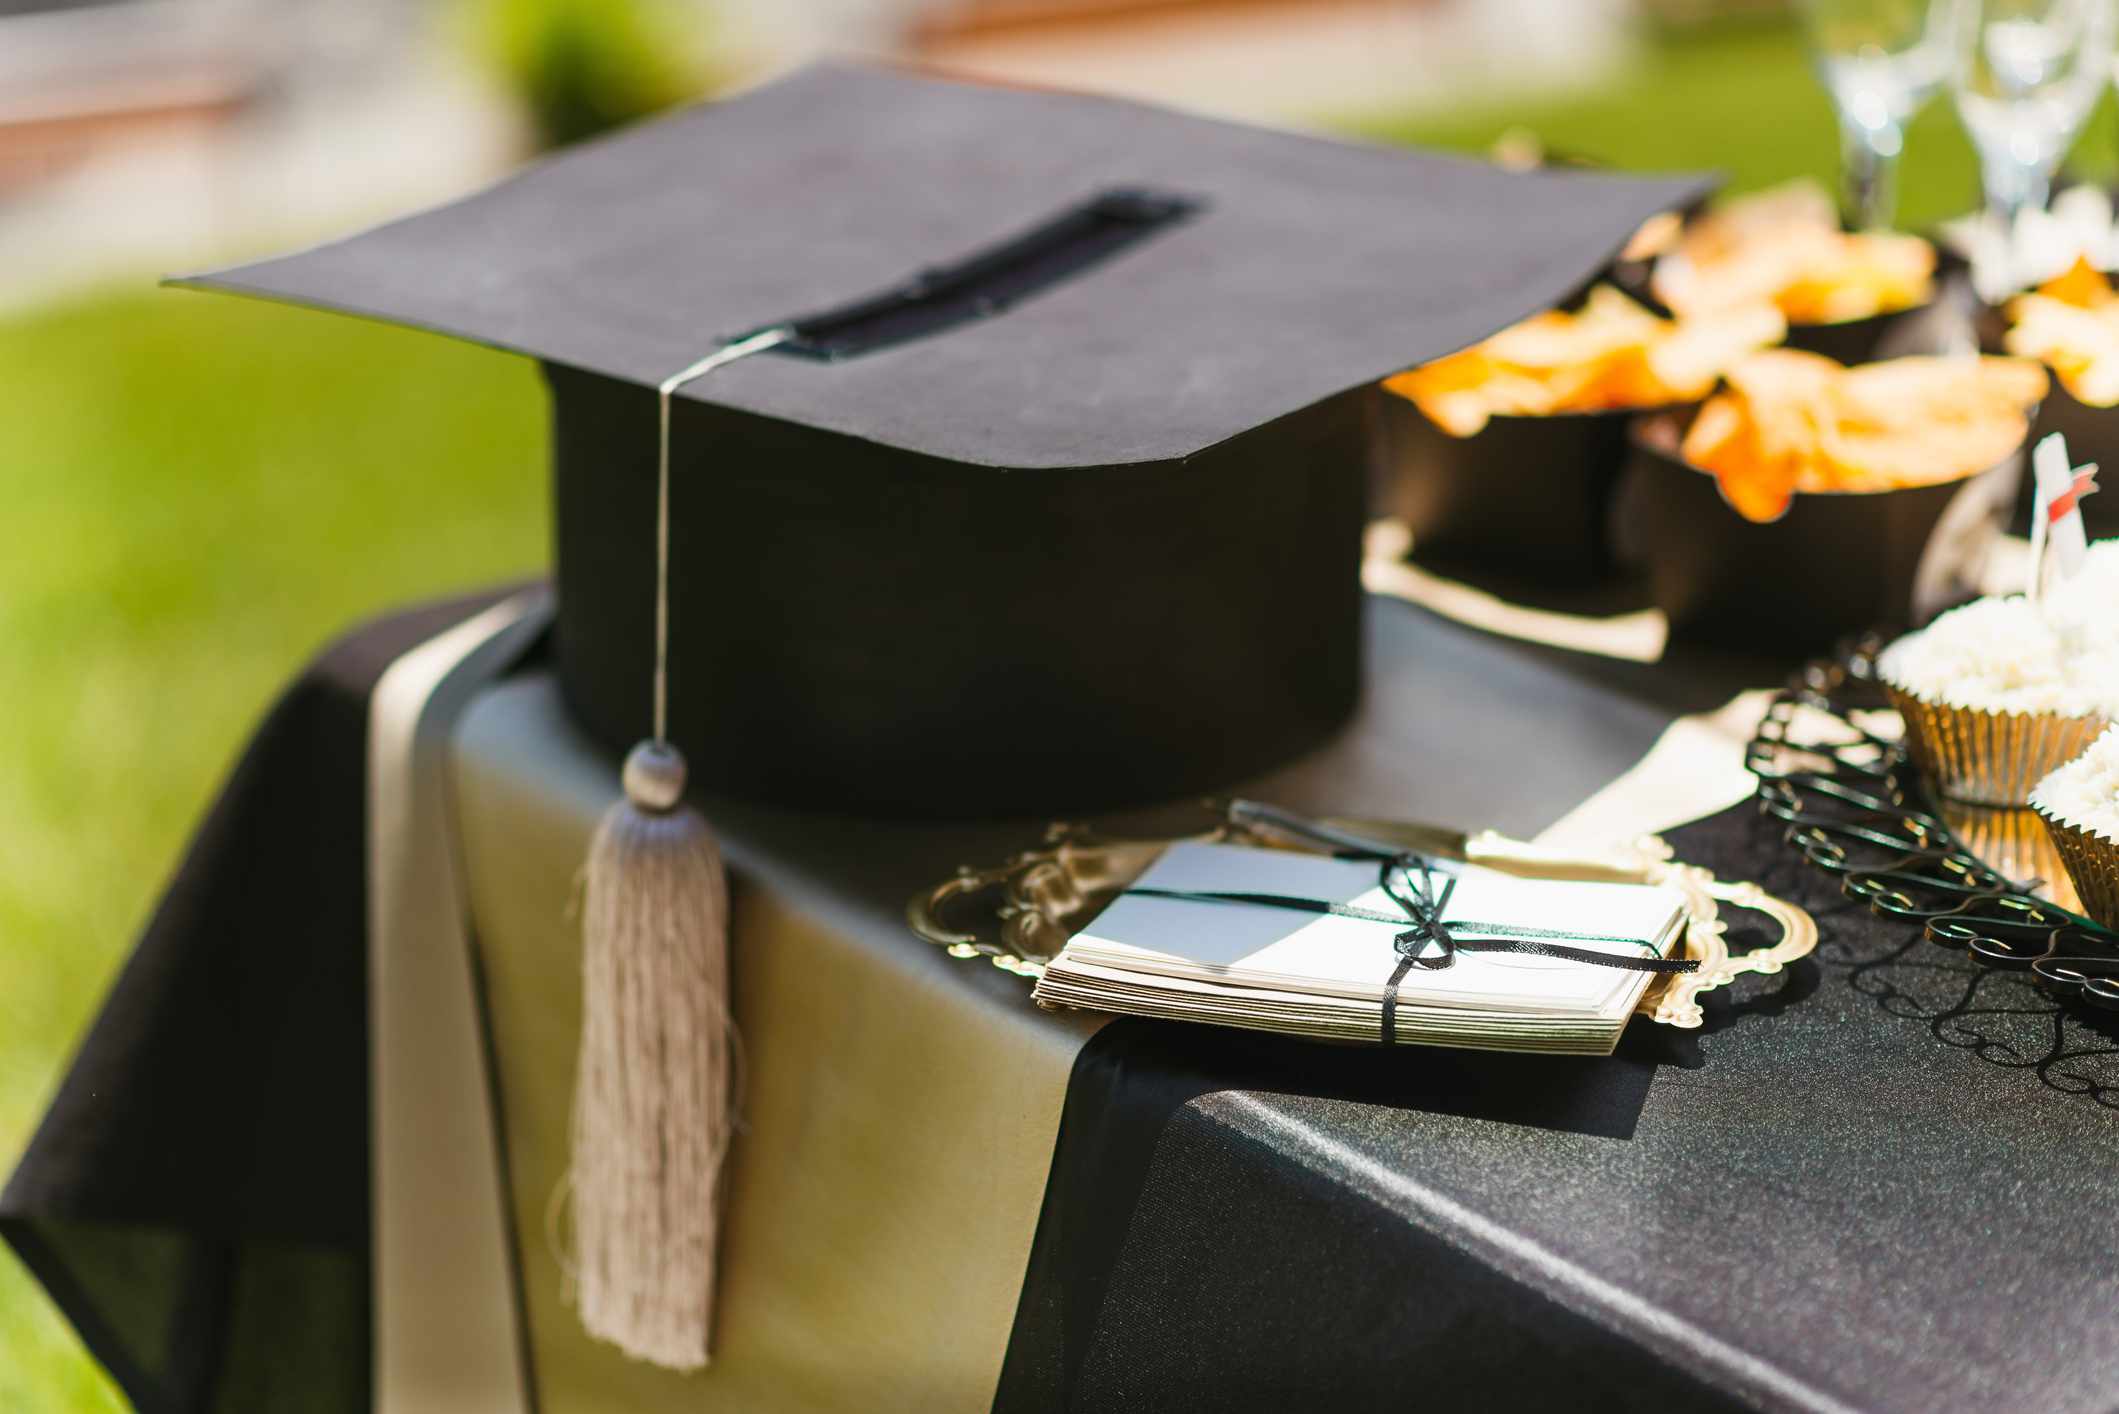 5 Things You Need When Planning a Graduation Party